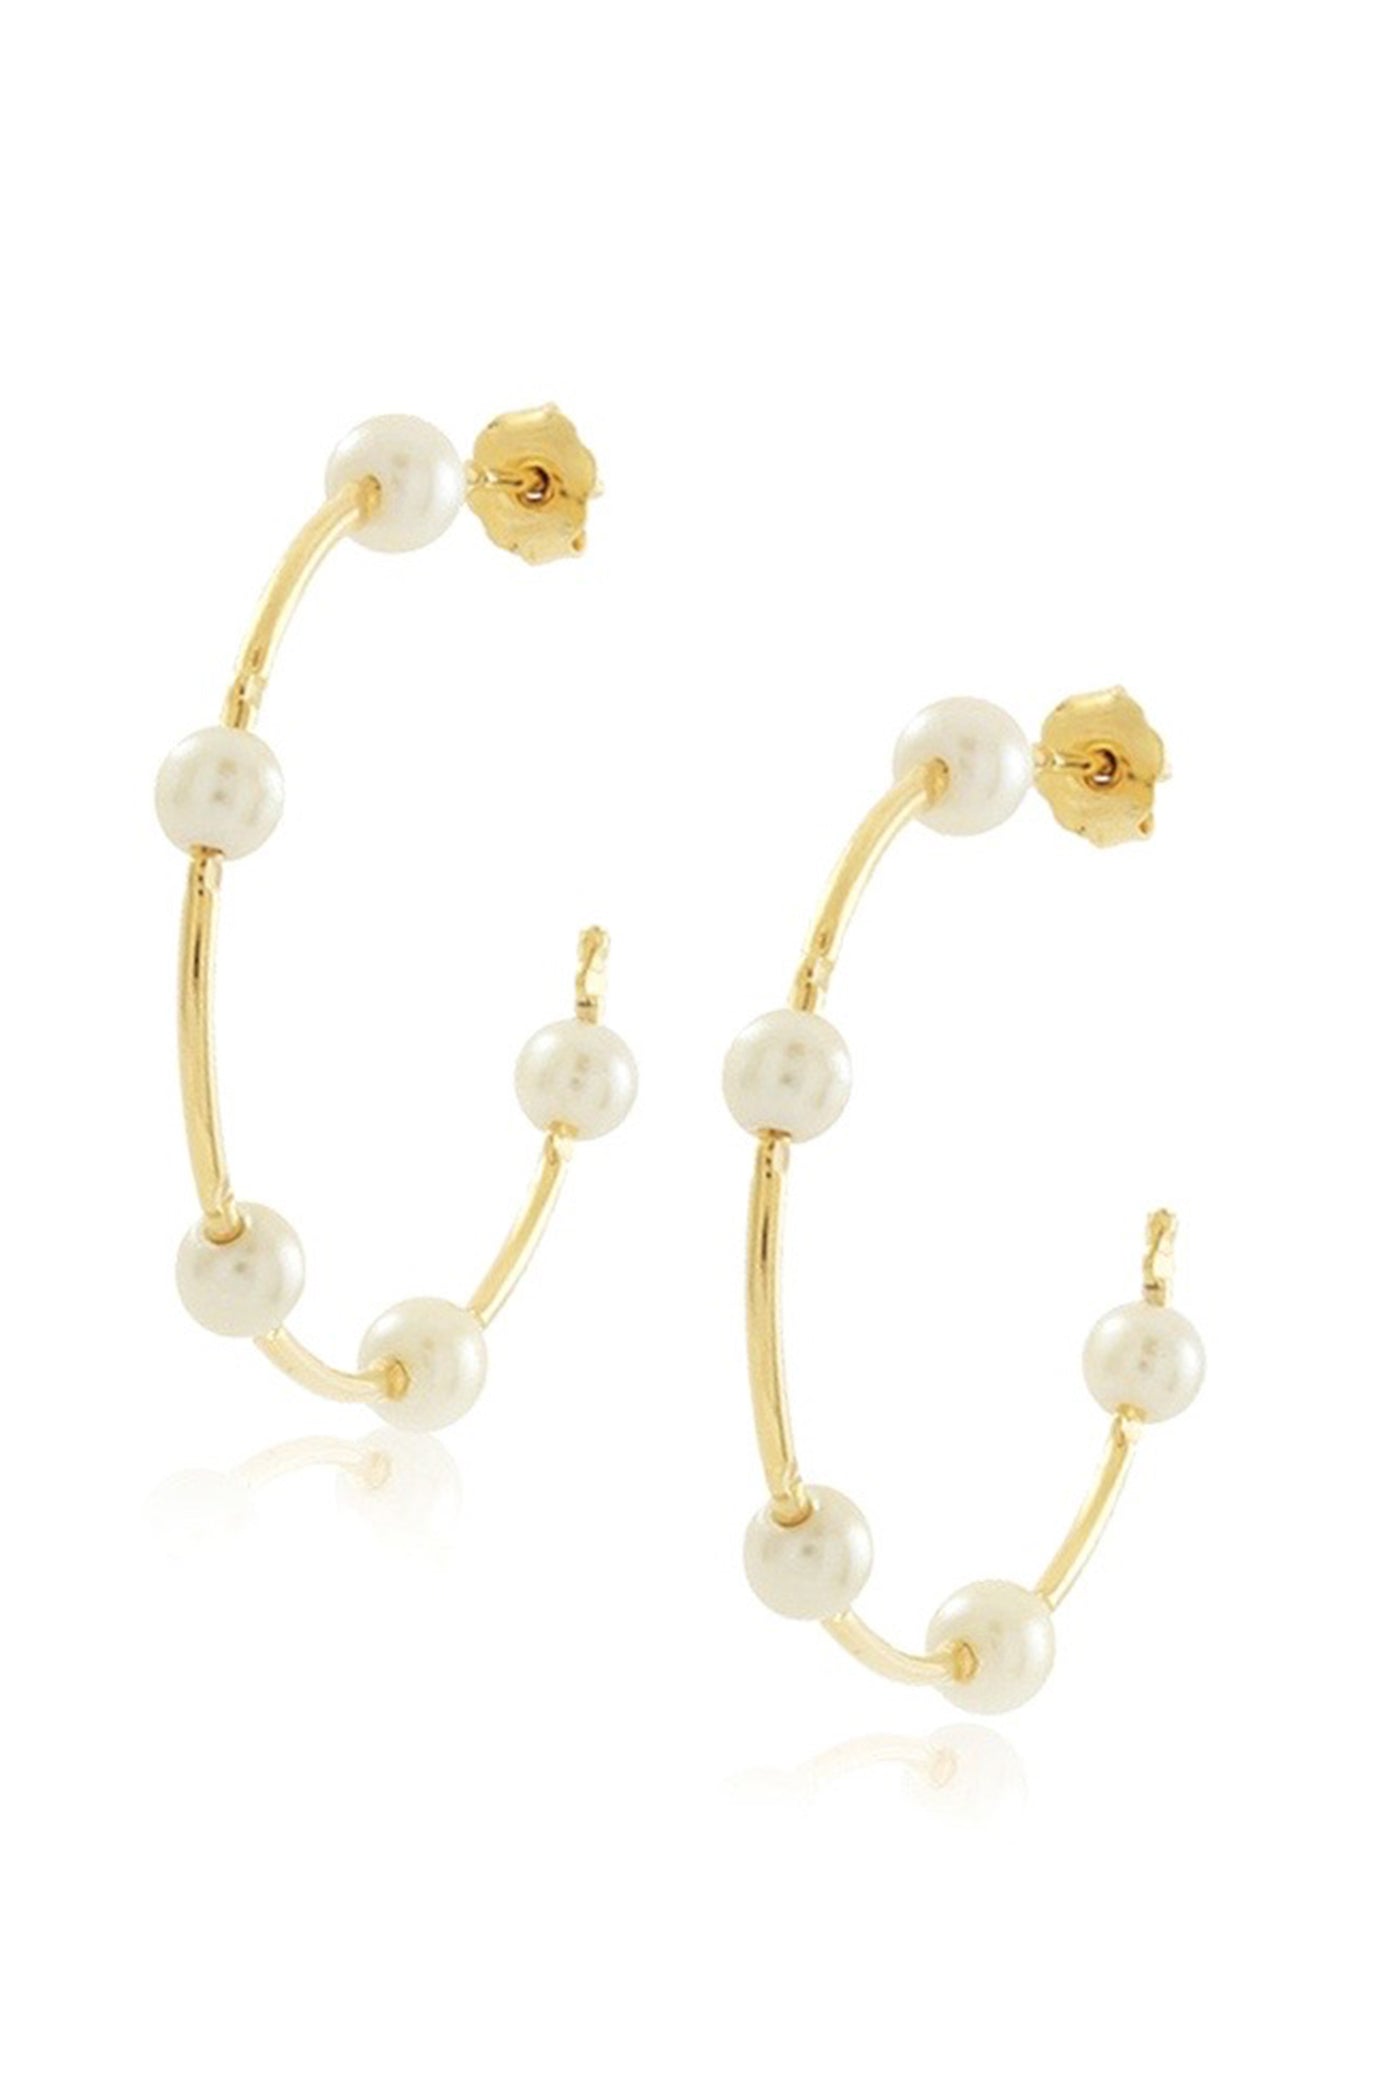 These gold hoops with pearl details are the perfect accessory for modest everyday dresses. 